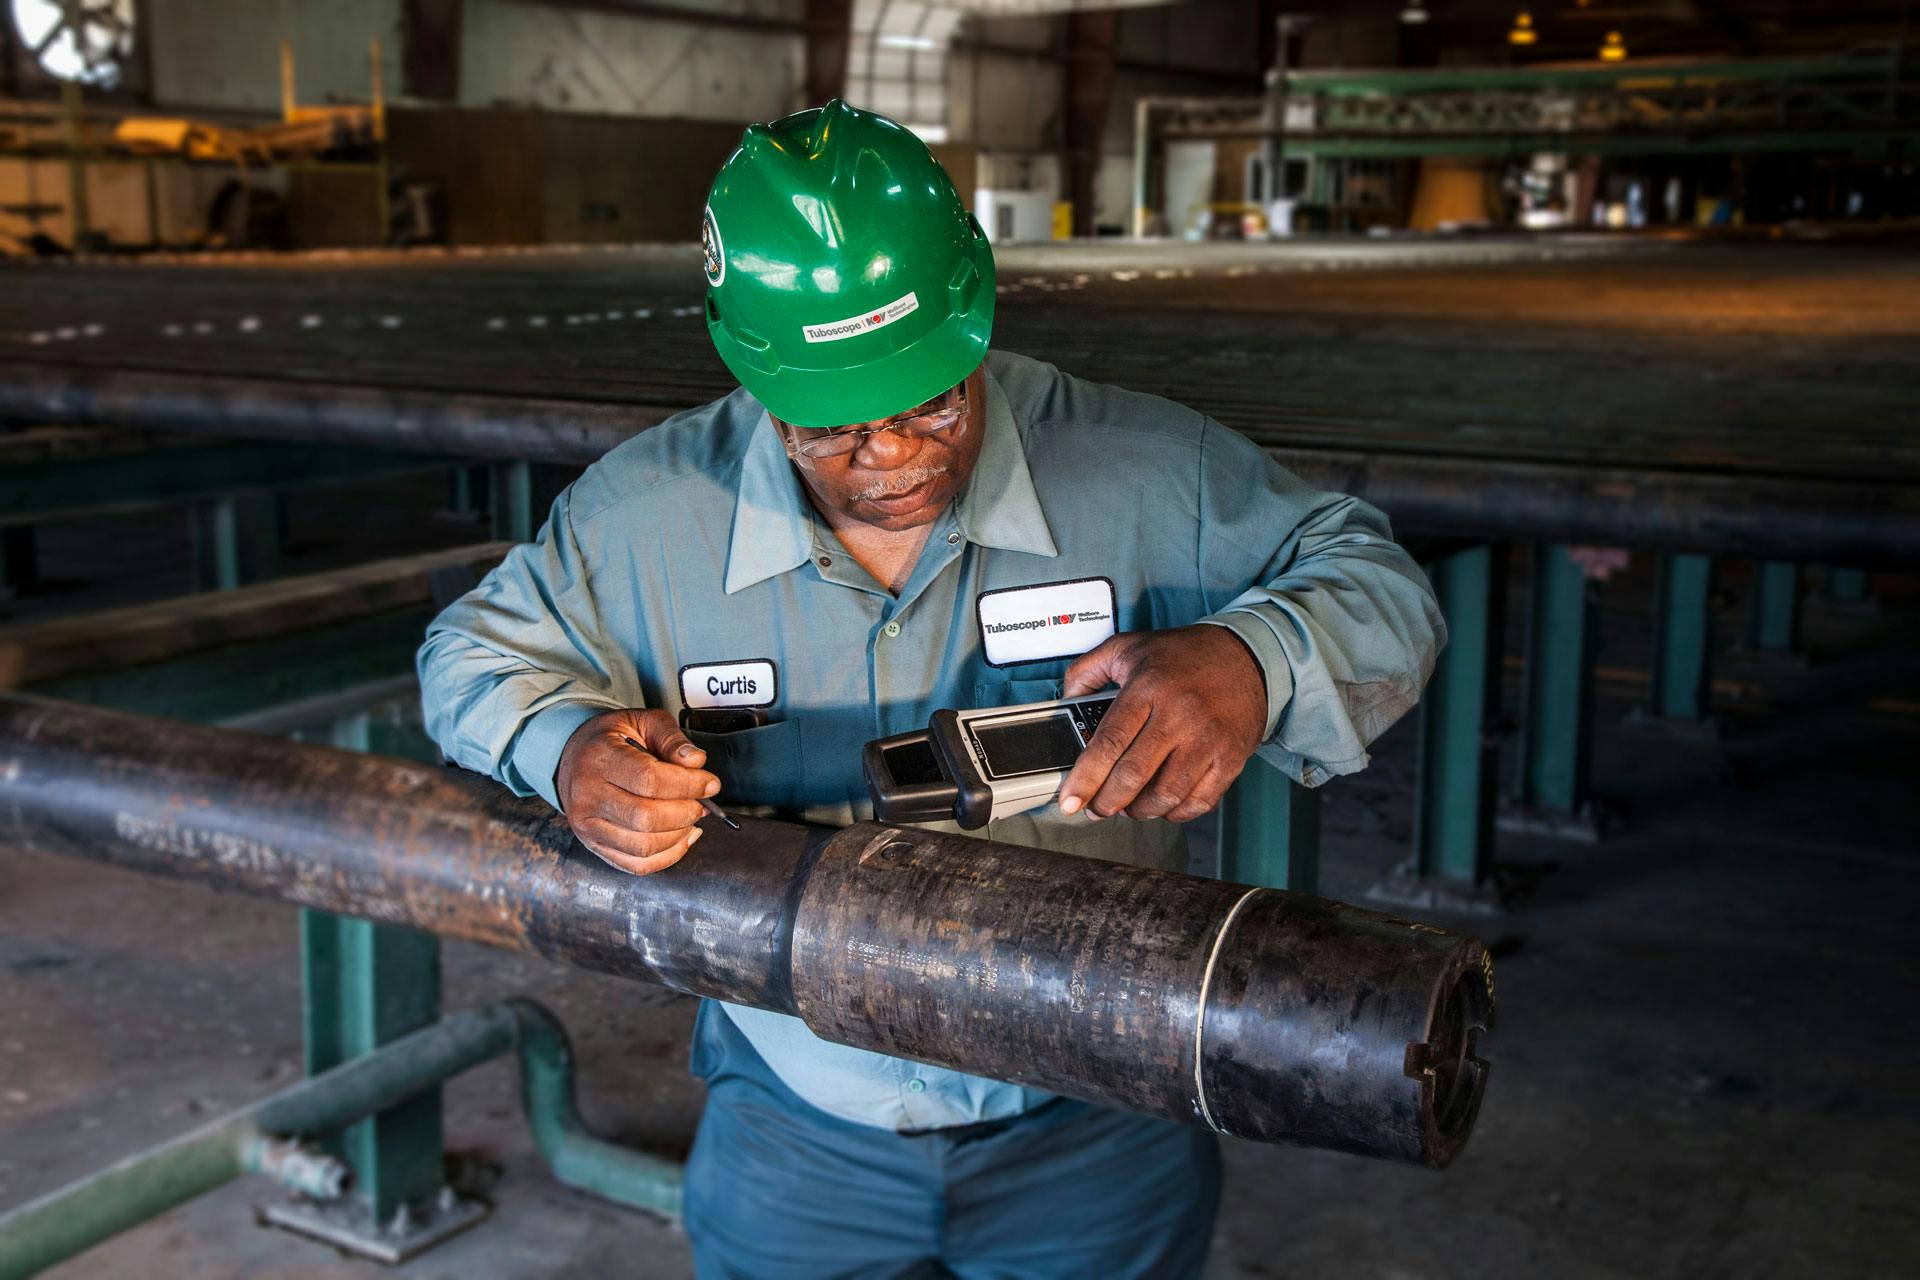 NOV Tuboscope employee checking drill pipe while in a facility